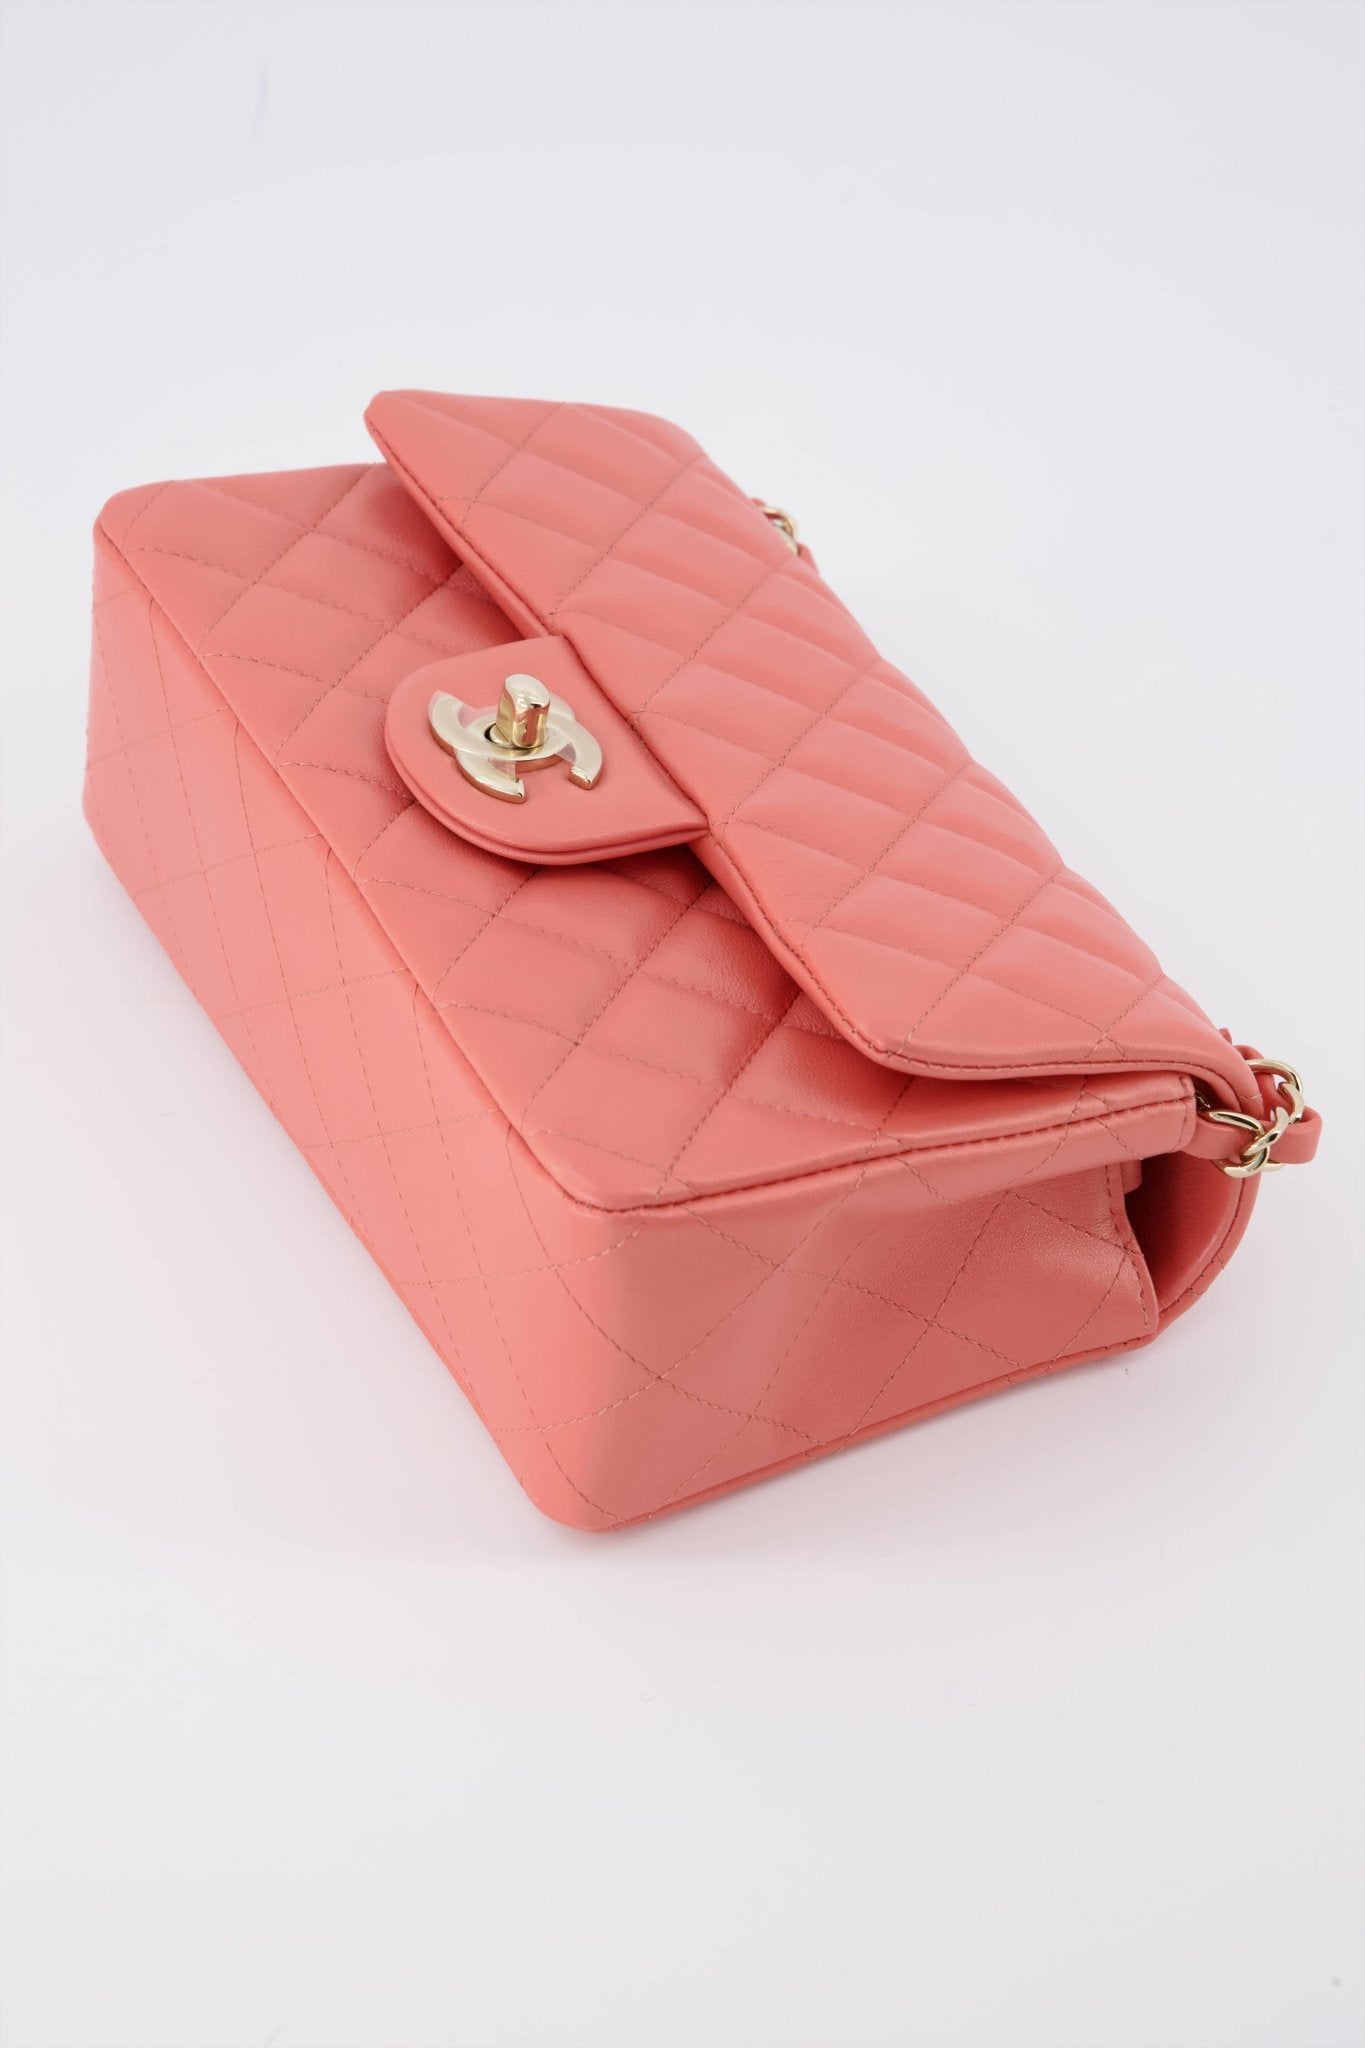 Chanel Mini Rectangular Flap Bag Pink Colour Lambskin with Champagne G –  Bags Of Personality